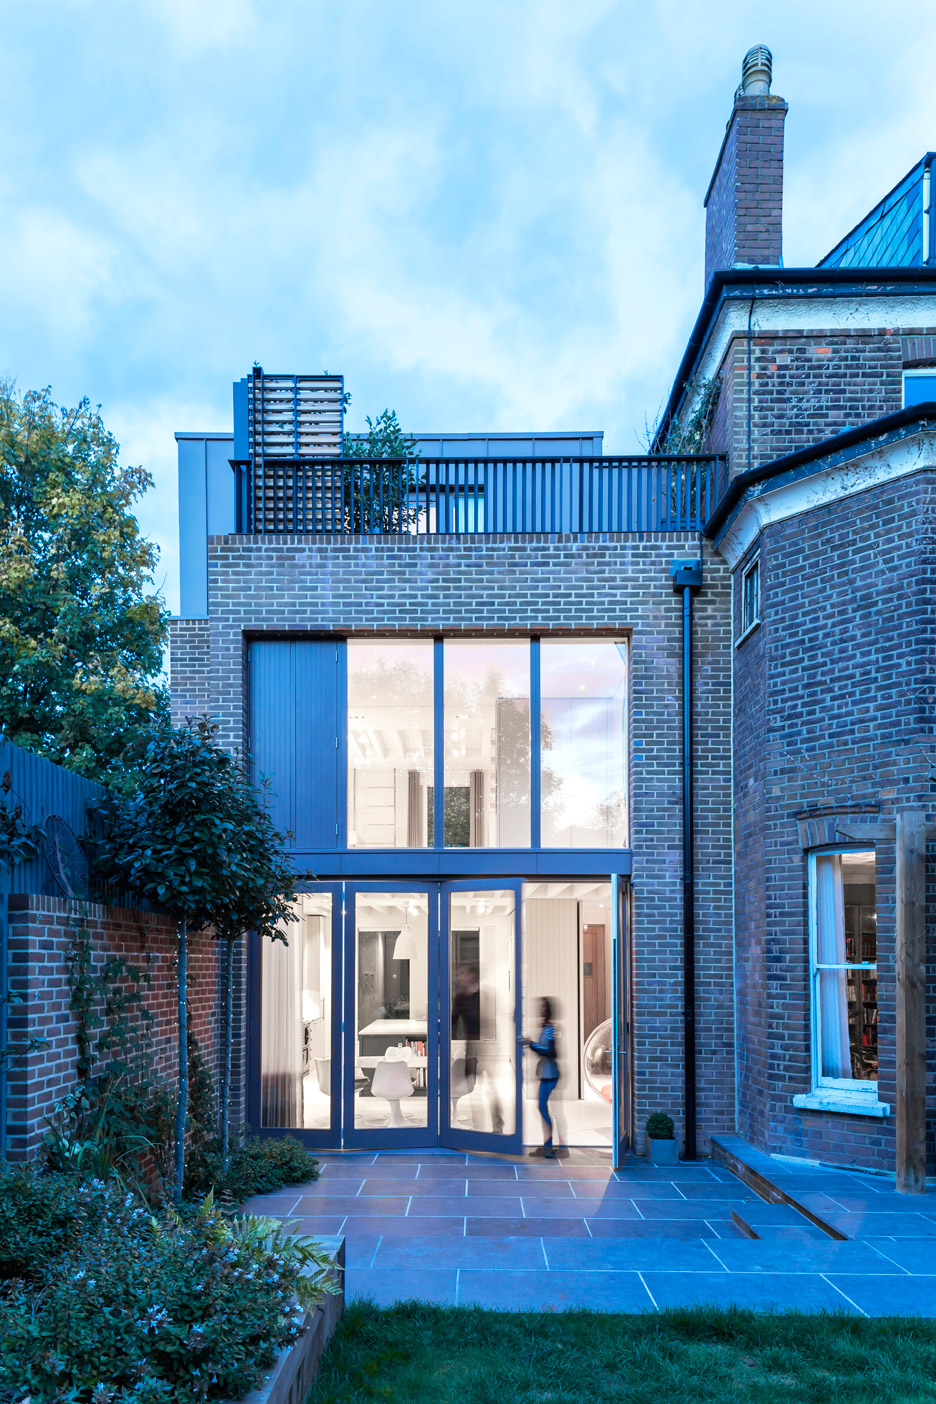 London House Extension By Alexander Martin Features A Double-height Window Wall